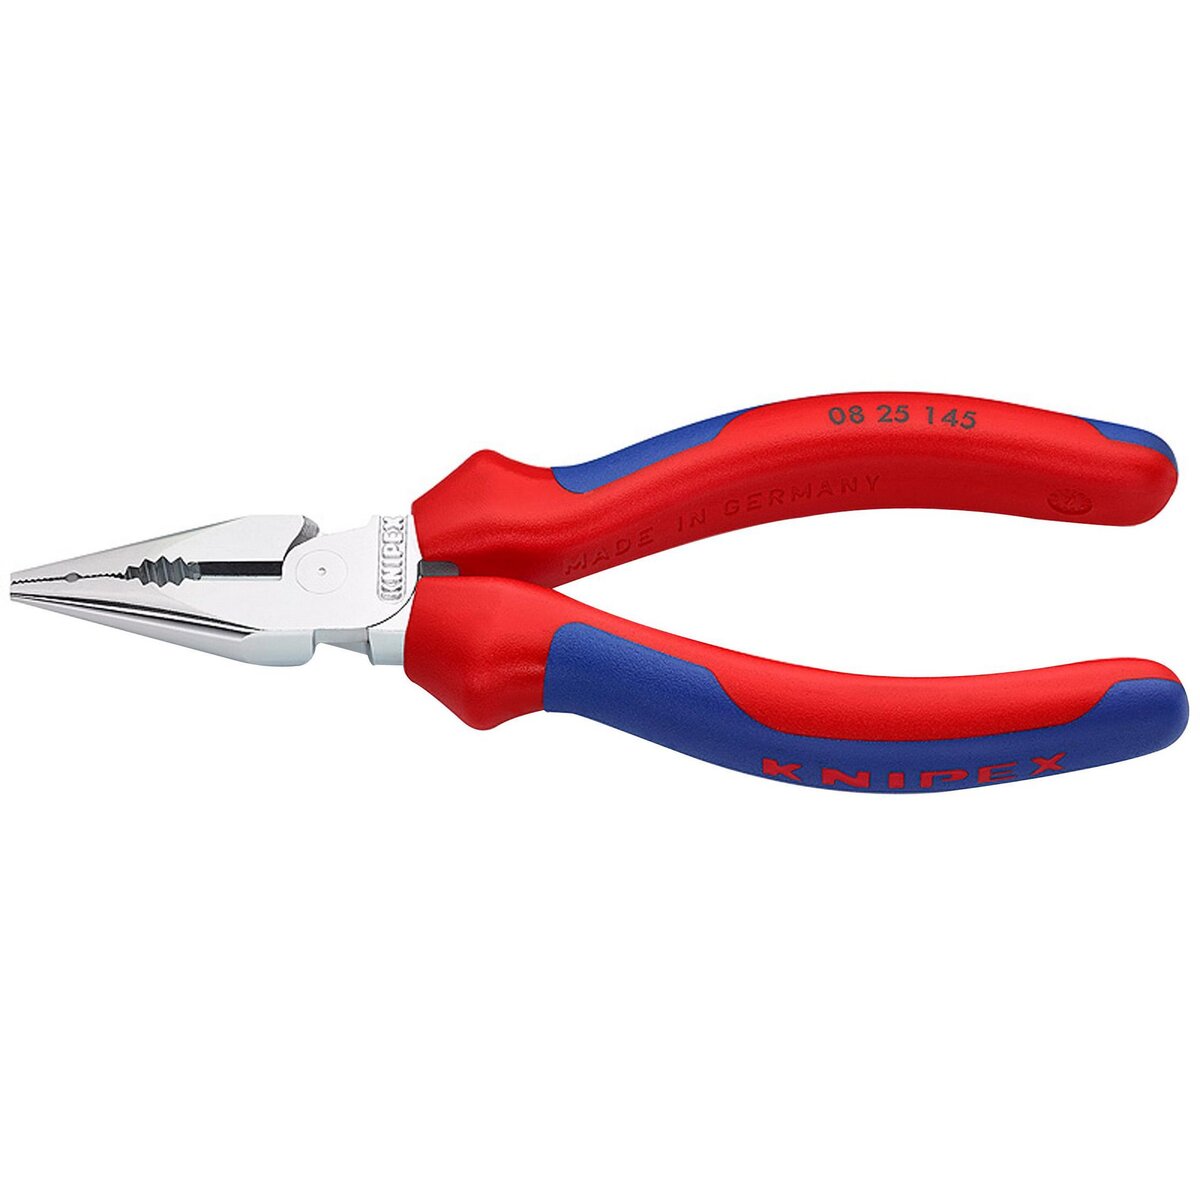 Knipex Pince universelle becs demi-ronds 145 mm